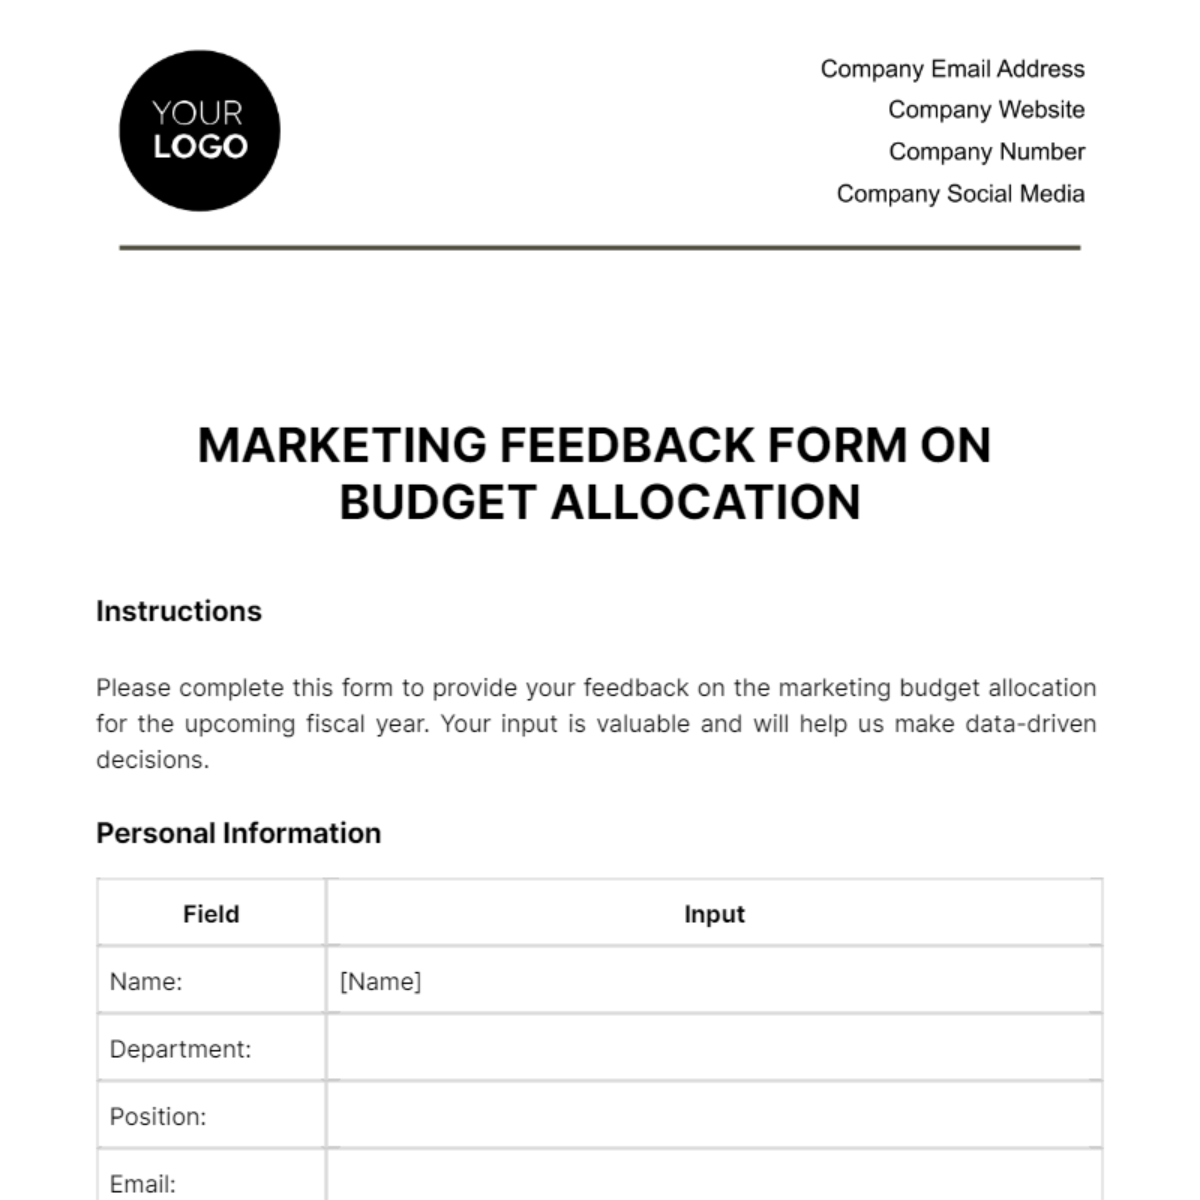 Free Marketing Feedback Form on Budget Allocation Template